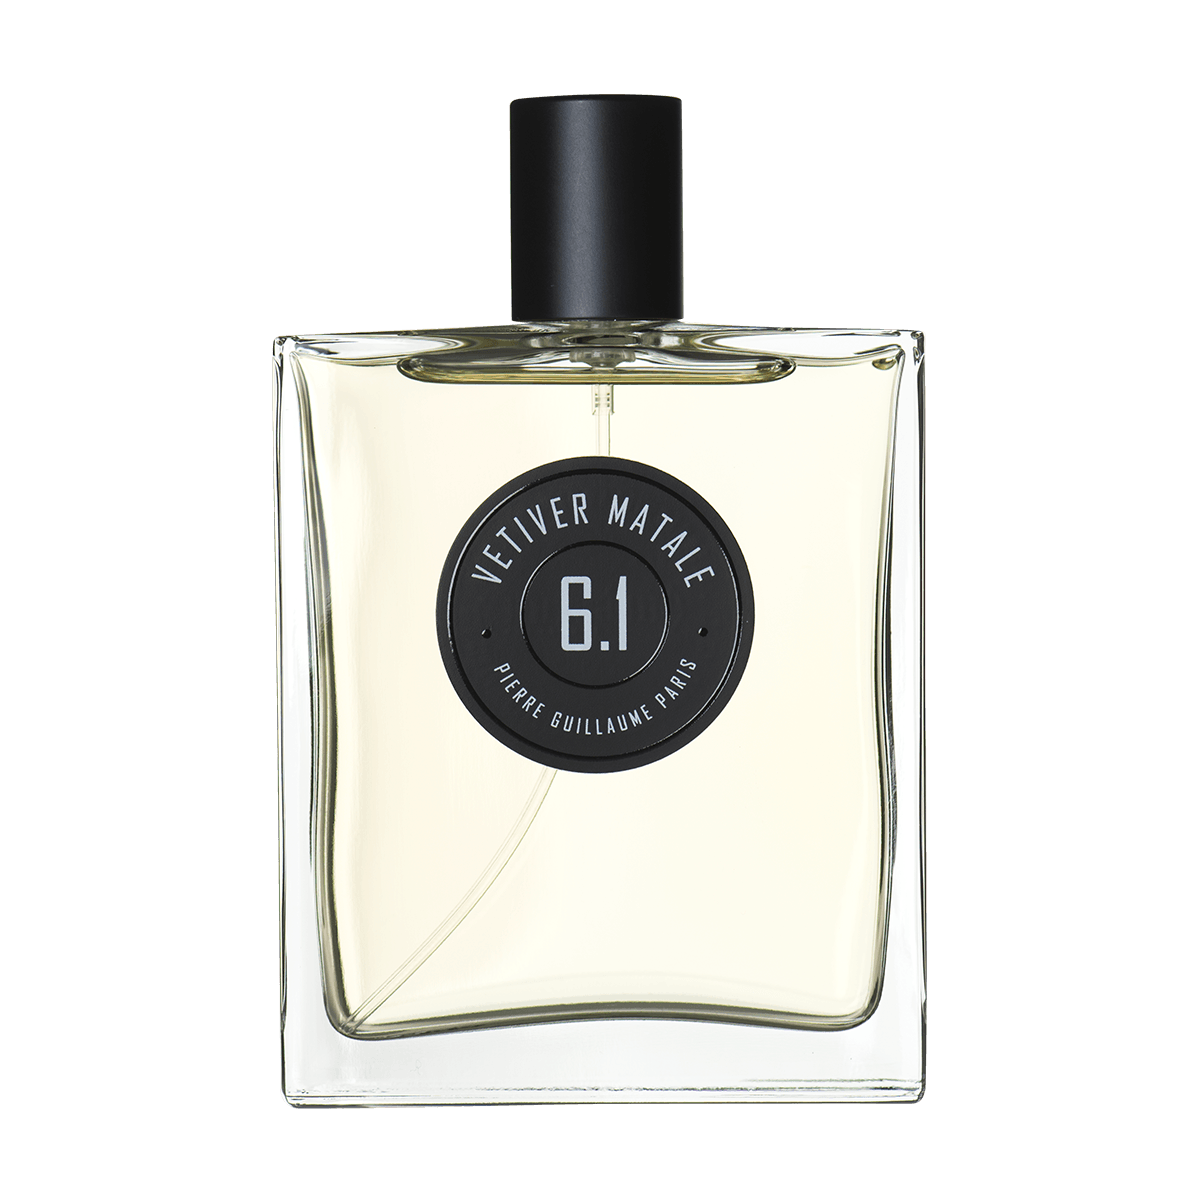 Image of 6.1 Vetiver Matale 100 ml by the perfume brand Pierre Guillaume